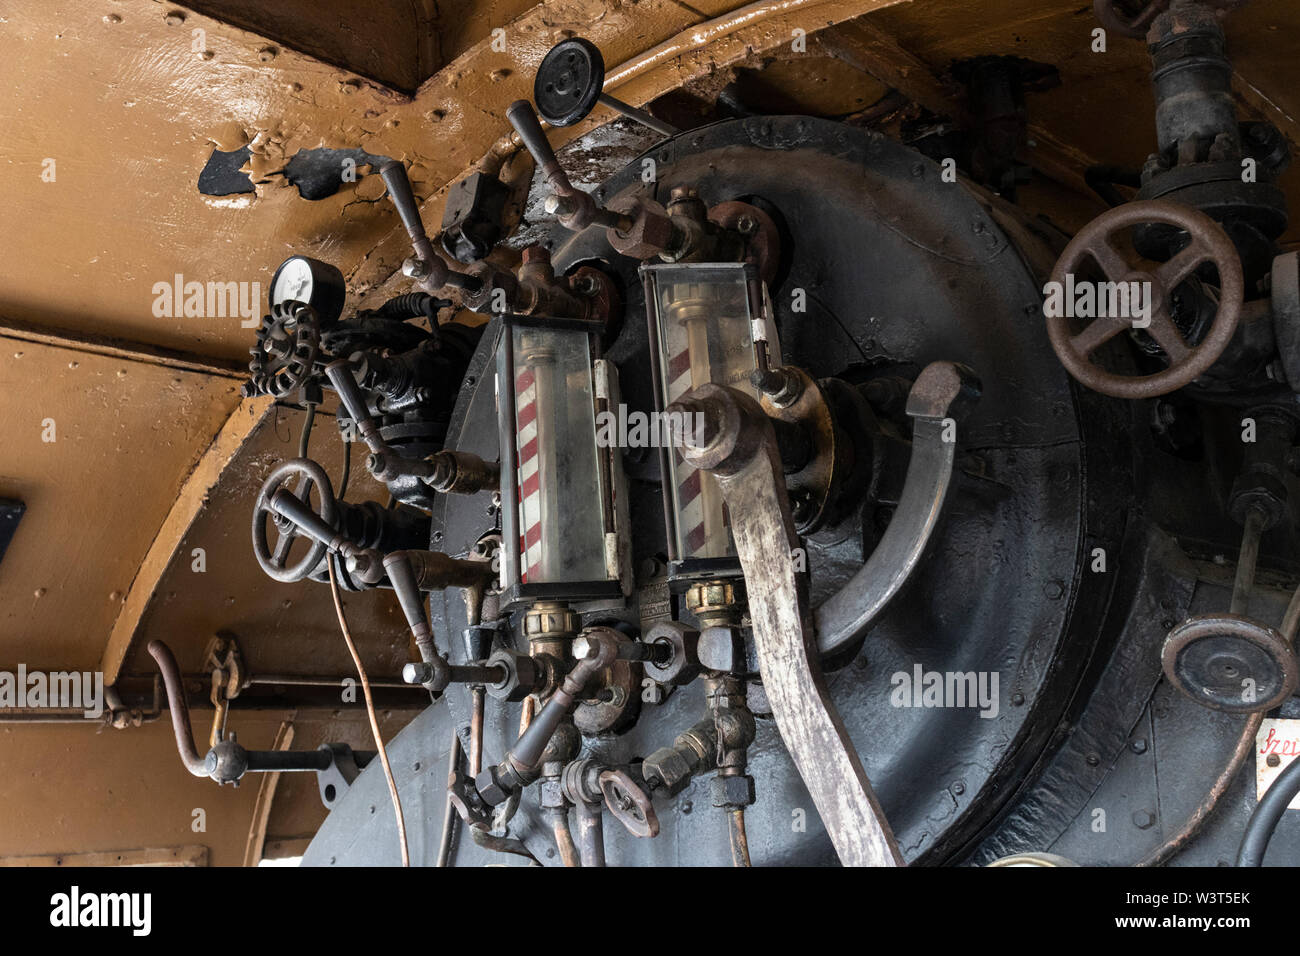 BUDAPEST, HUNGARY - April 05, 2019: Firebox and valves of a historic steam locomotive at the Hungarian Railway Museum. Stock Photo